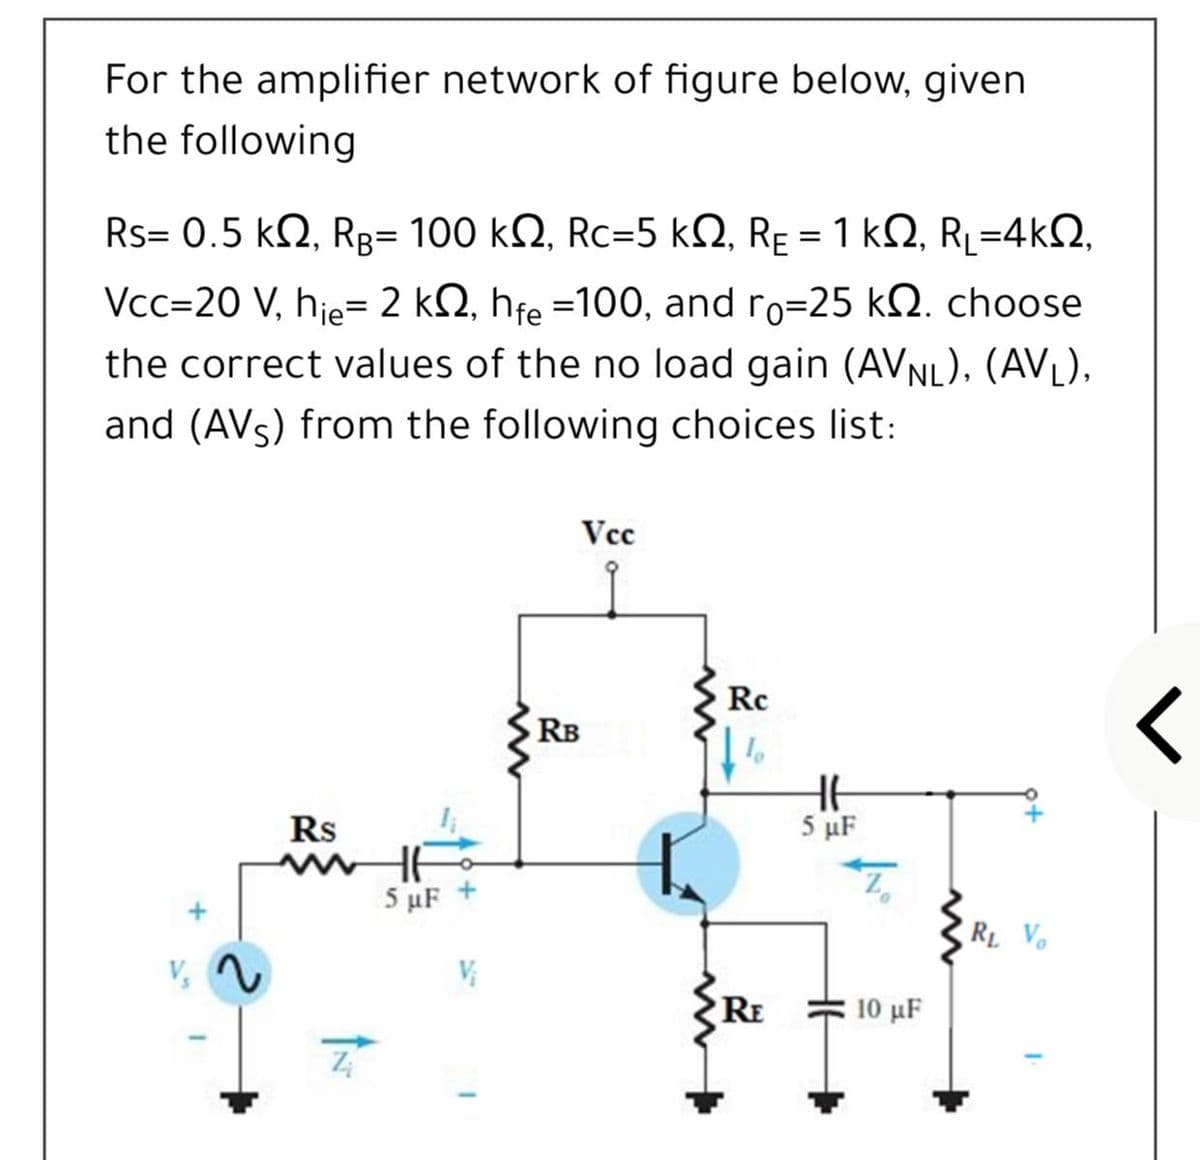 For the amplifier network of figure below, given
the following
Rs= 0.5 k2, Rg= 100 kQ, Rc=5 kQ, RE = 1 k2, RL=4k2,
Vcc=20 V, hje= 2 kN, hfe =100, and ro=25 kQ. choose
%3D
the correct values of the no load gain (AVNL), (AVL),
and (AVs) from the following choices list:
Vcc
Rc
RB
Rs
5 µF
5 μF
RL Vo
V,
RE
10 μF
